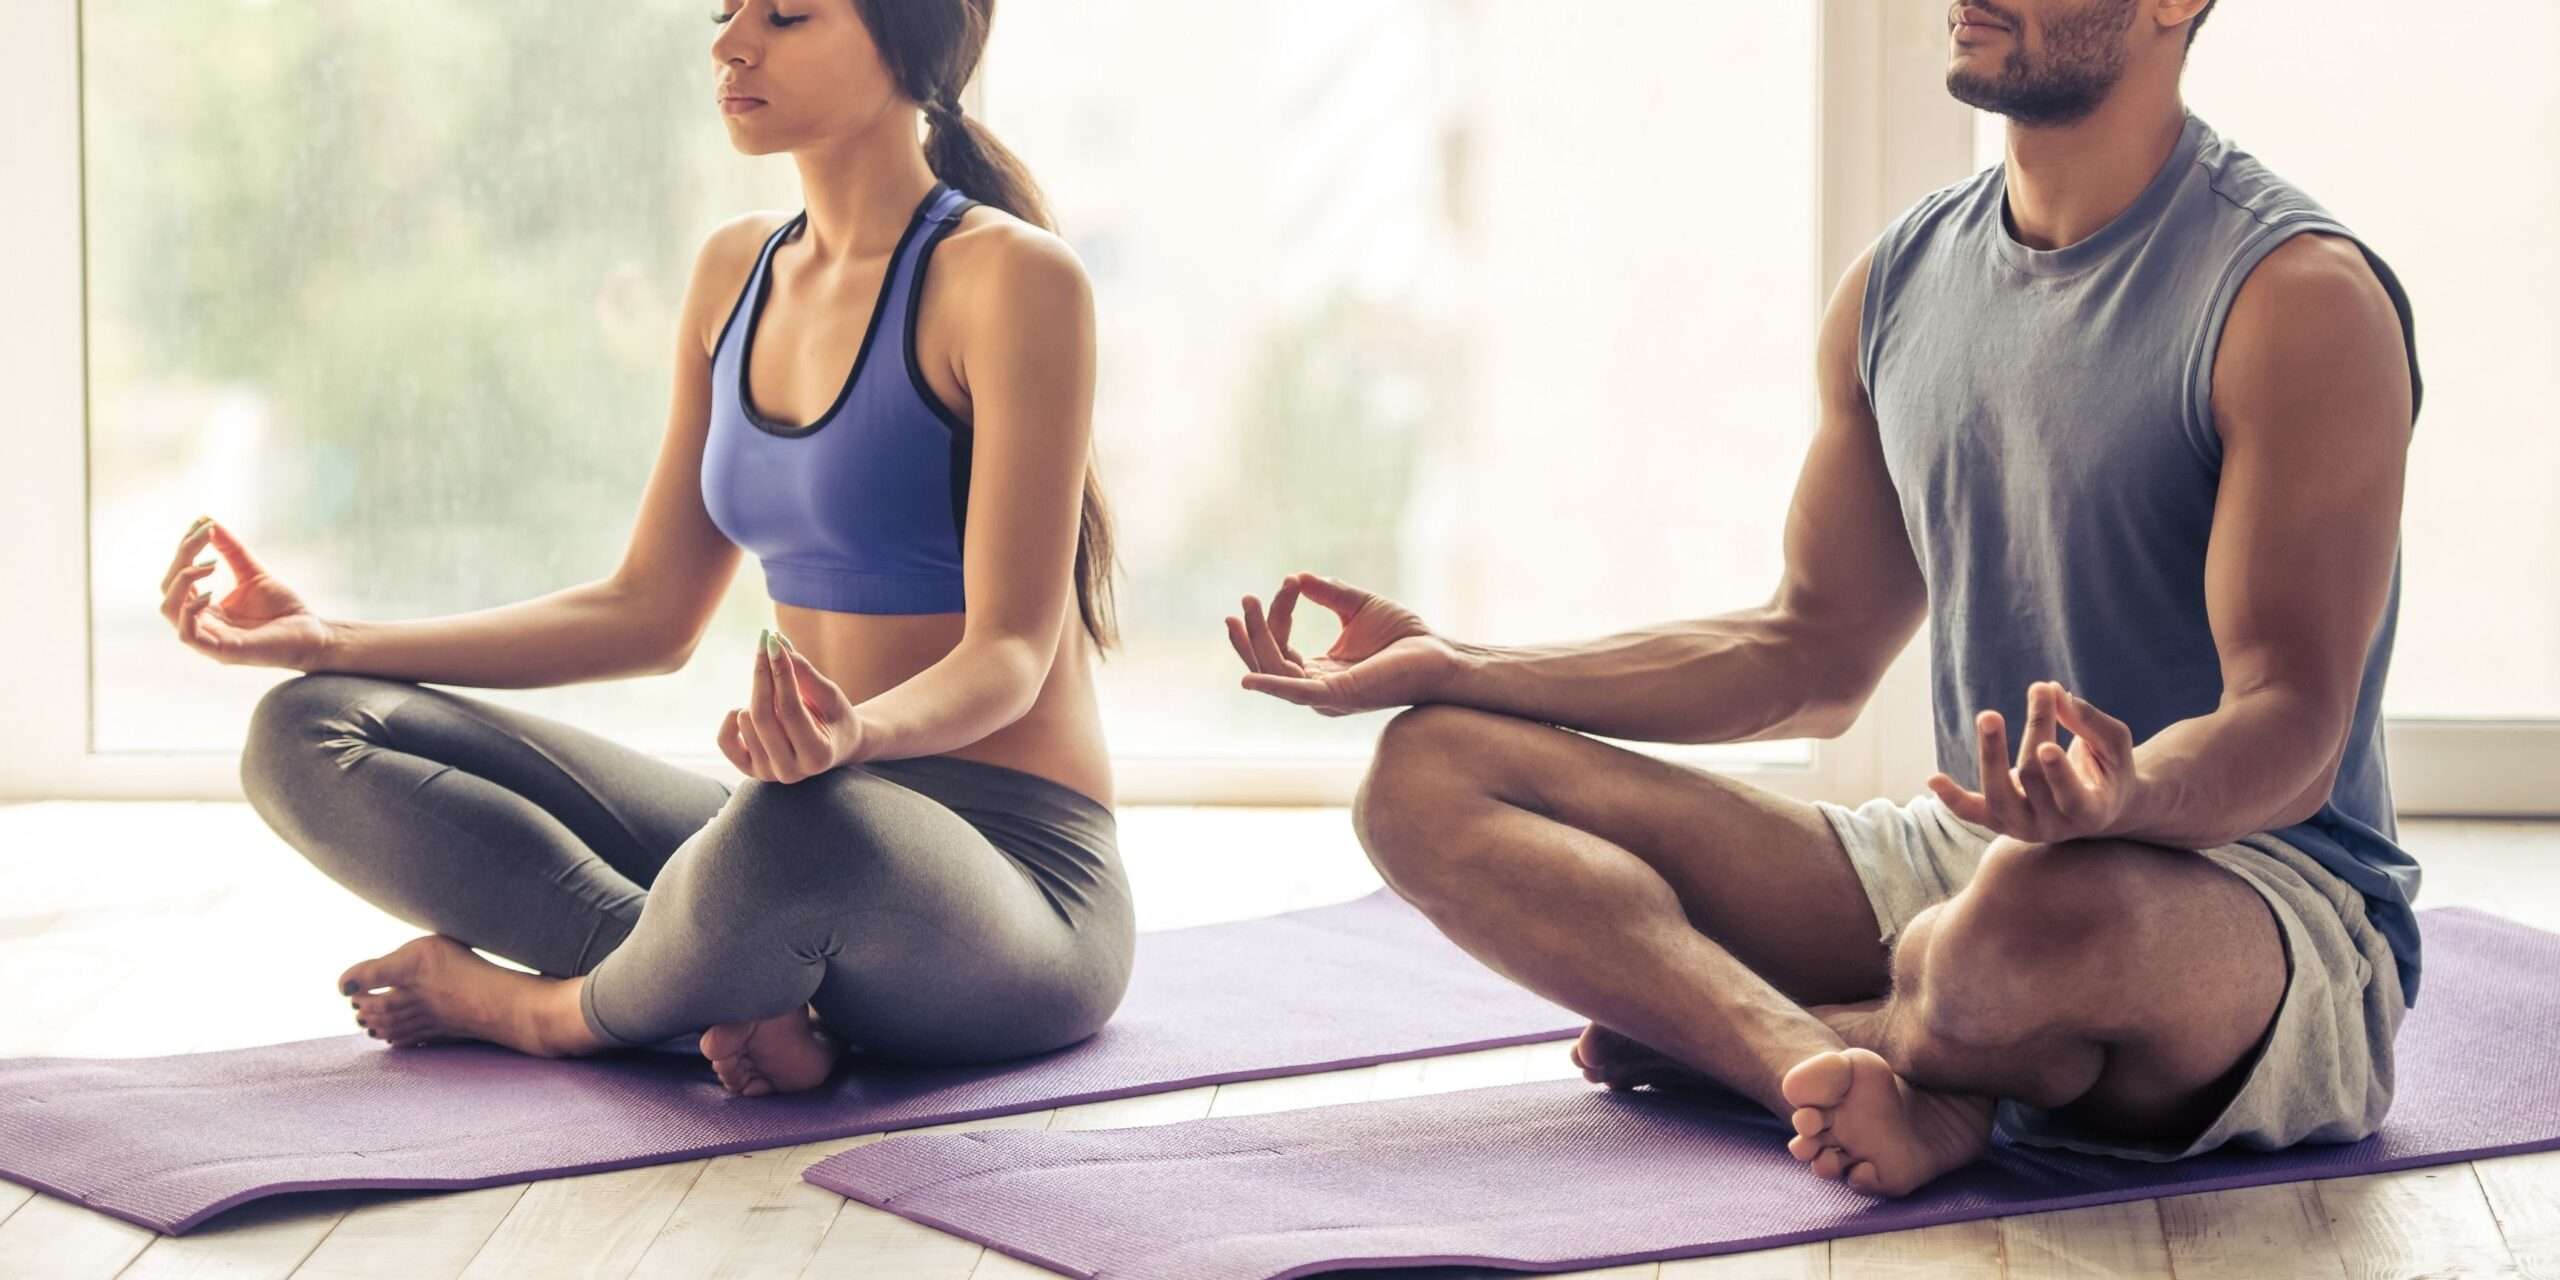 Both male and female can meditate for spiritual healing through yoga